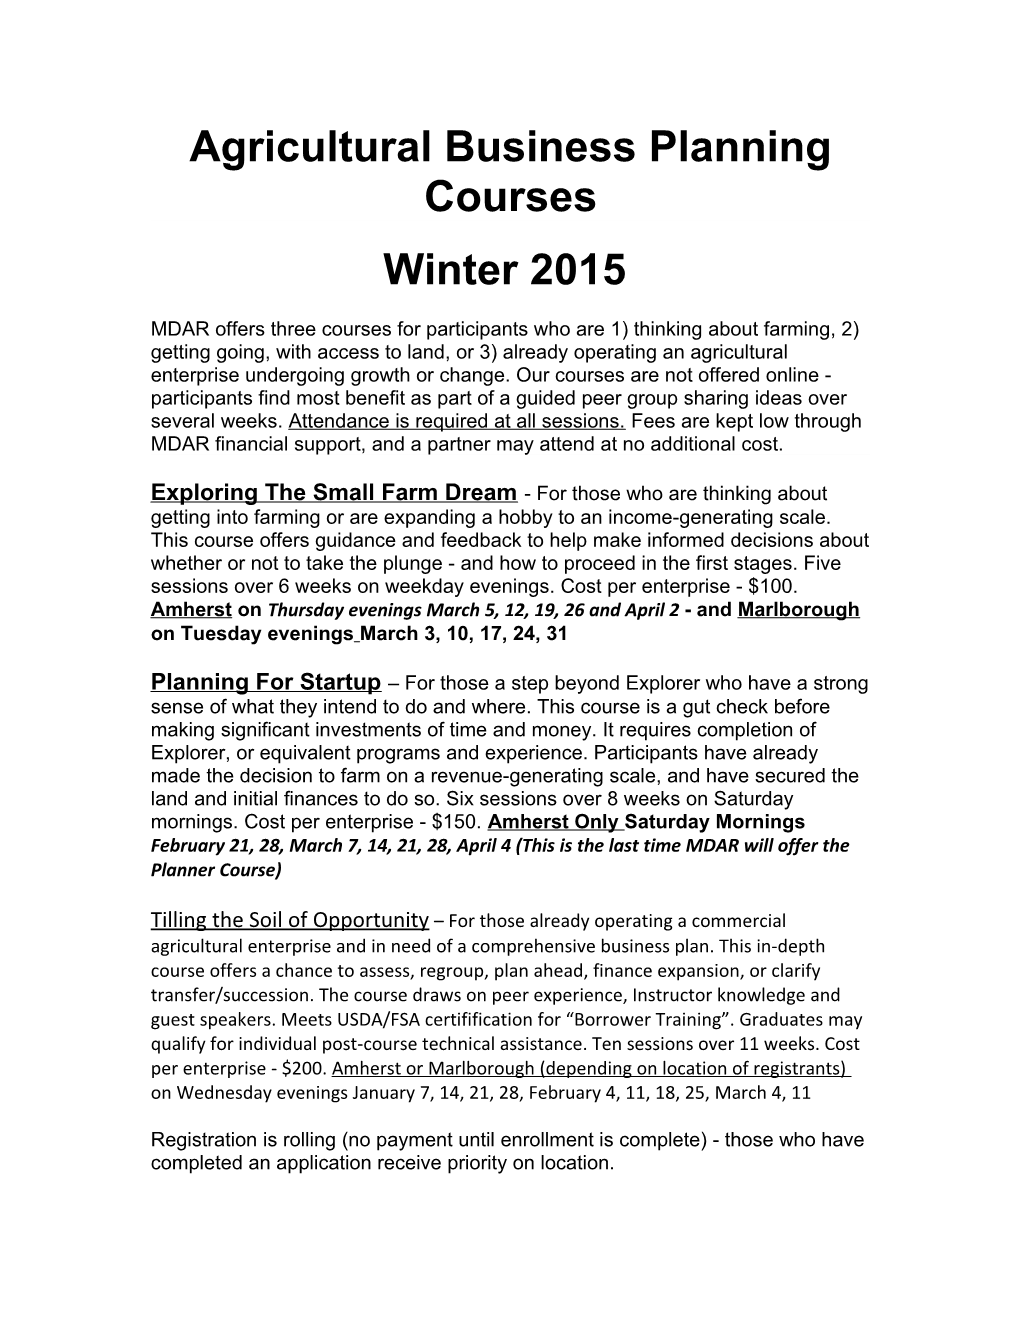 Agricultural Business Planning Courses